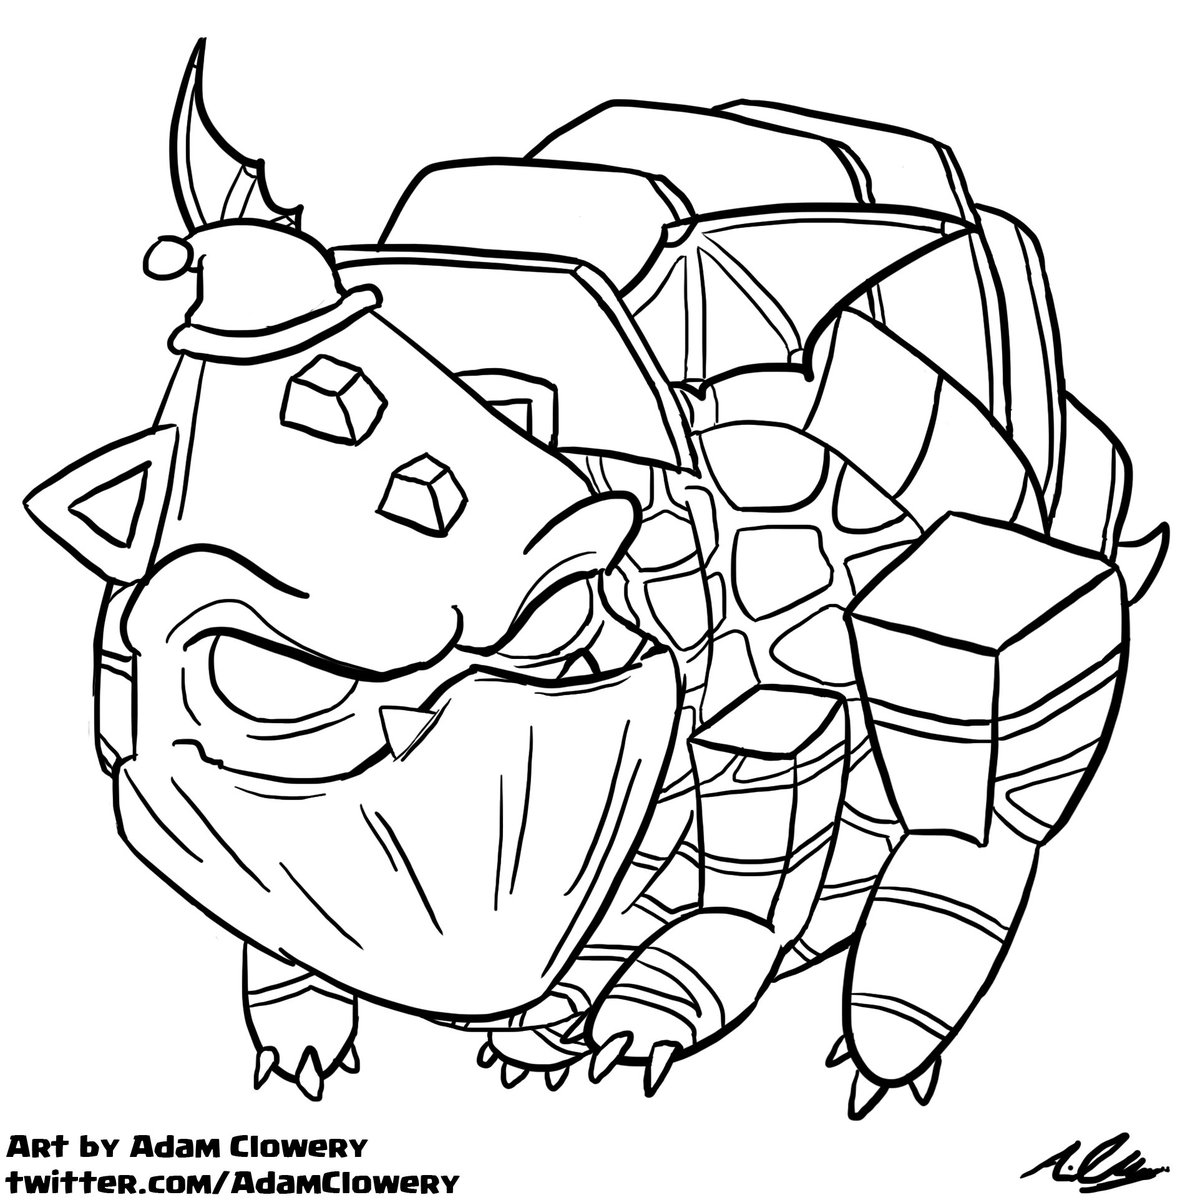 Clash Royale Coloring Pages at GetColorings.com | Free printable